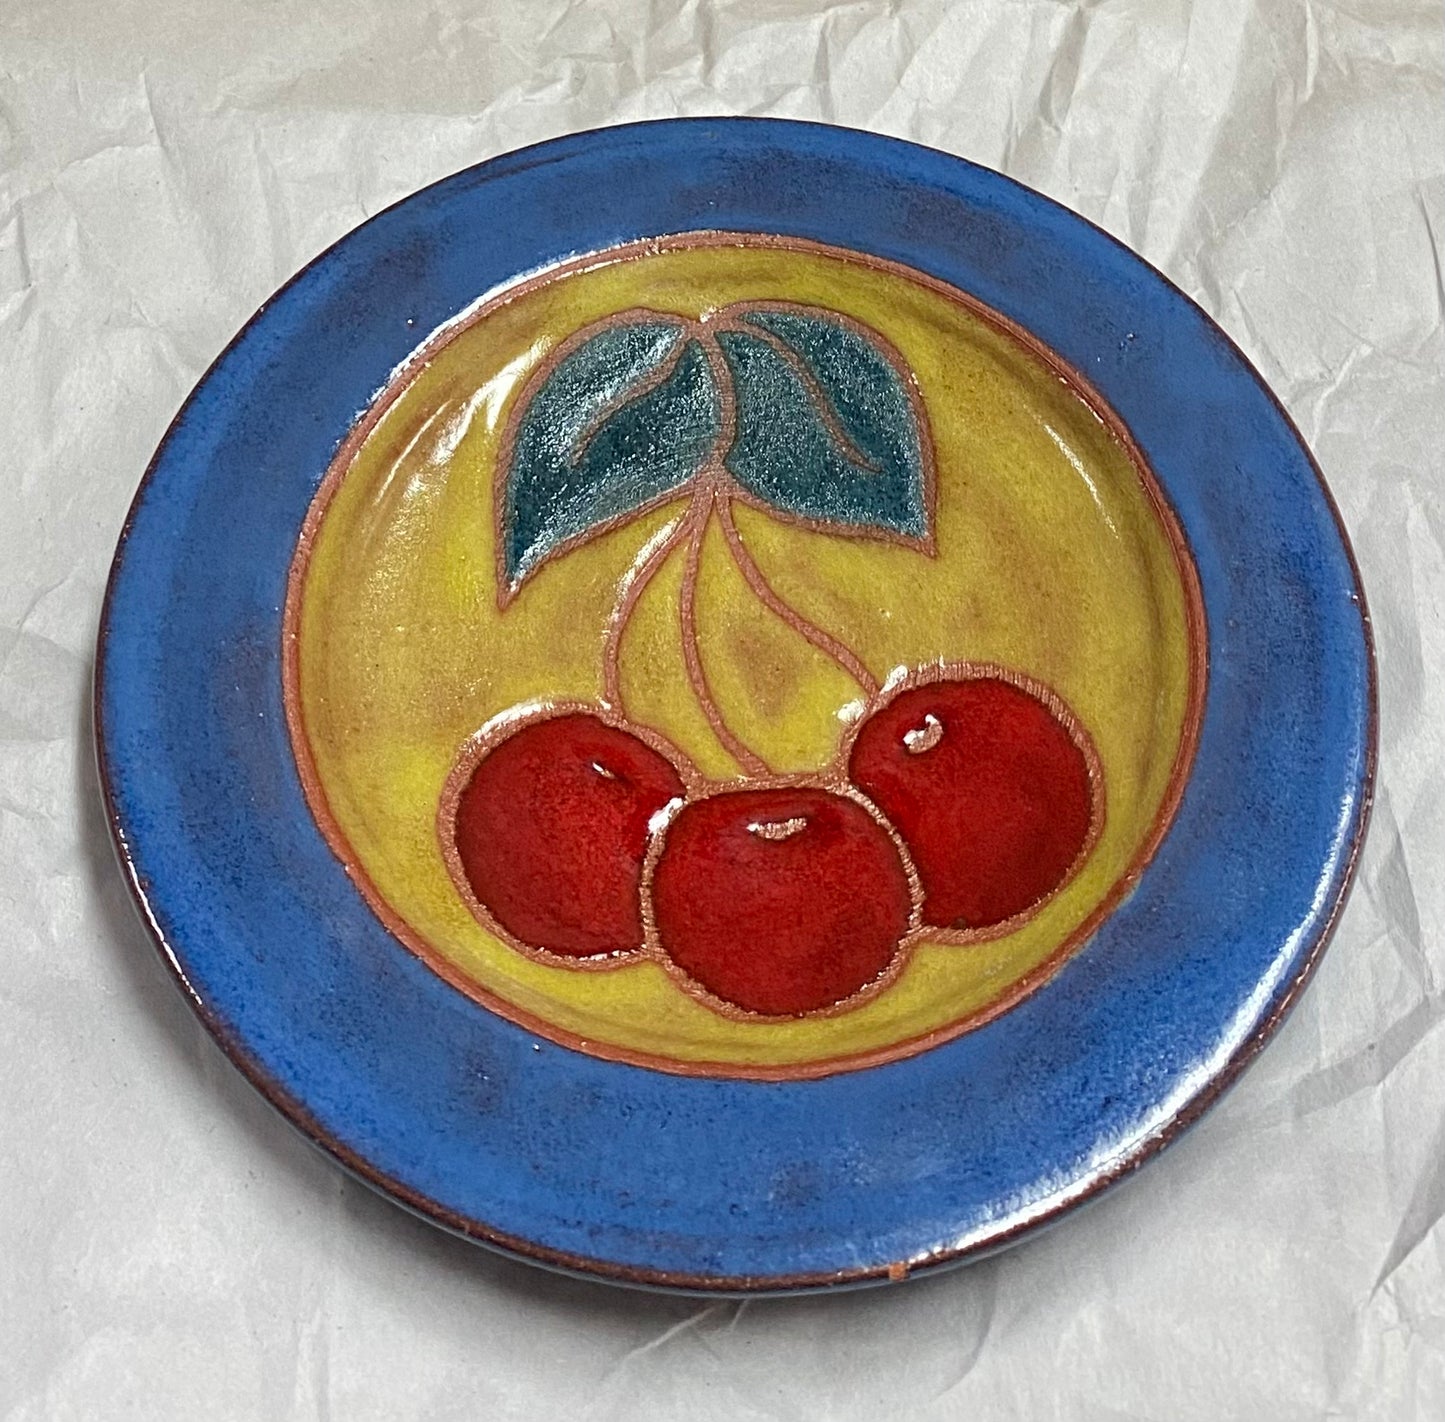 Handcrafted Orcas Island pottery decorative ceramic cherry plate